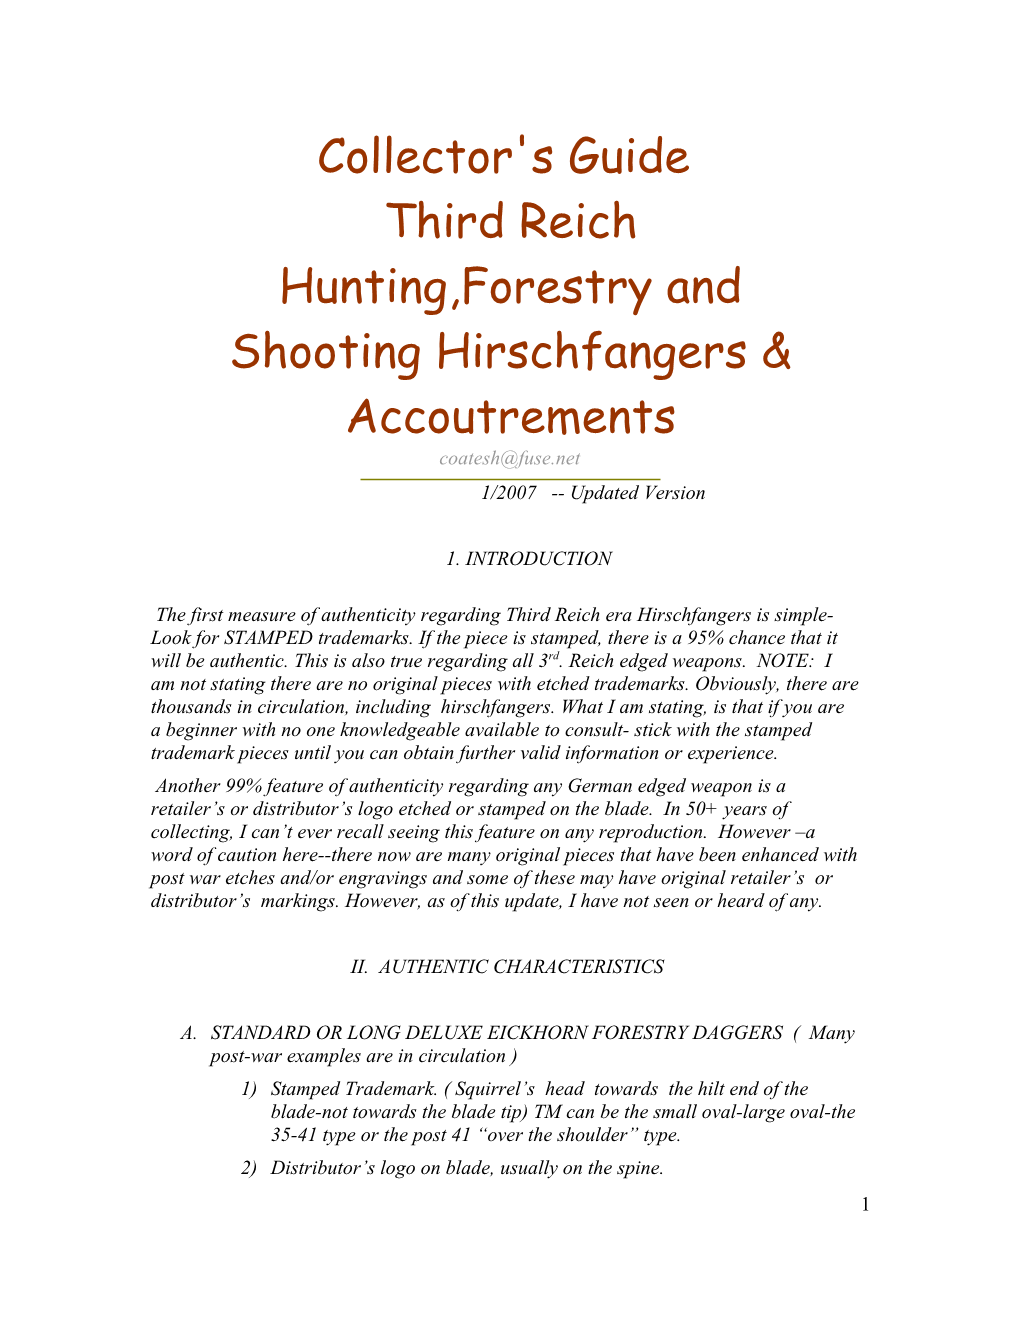 Third Reich Hunting,Forestry and Shooting Hirschfangers & Accoutrements